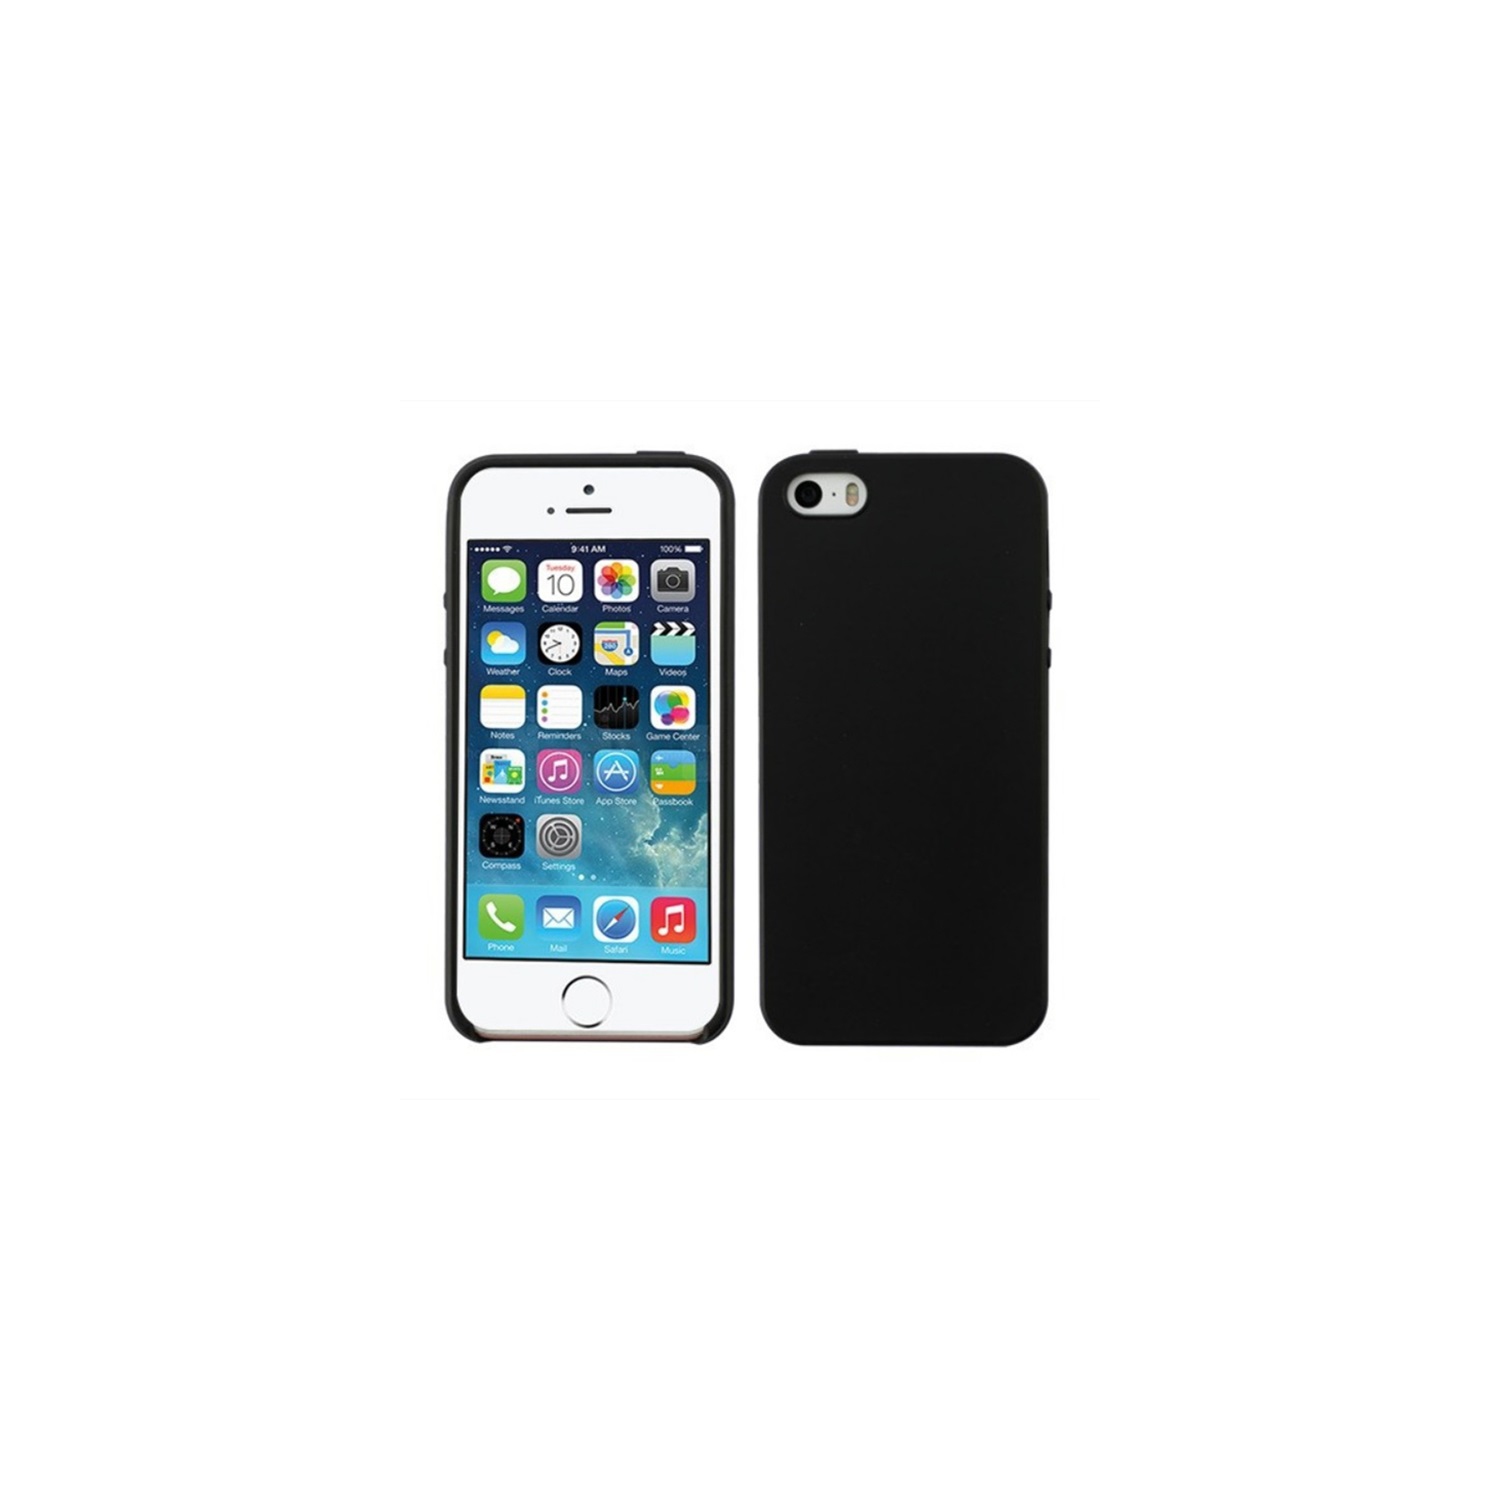 【CSmart】 Ultra Thin Soft TPU Silicone Jelly Bumper Back Cover Case for iPhone 6 Plus & 6S Plus (5.5"), Transparent Black